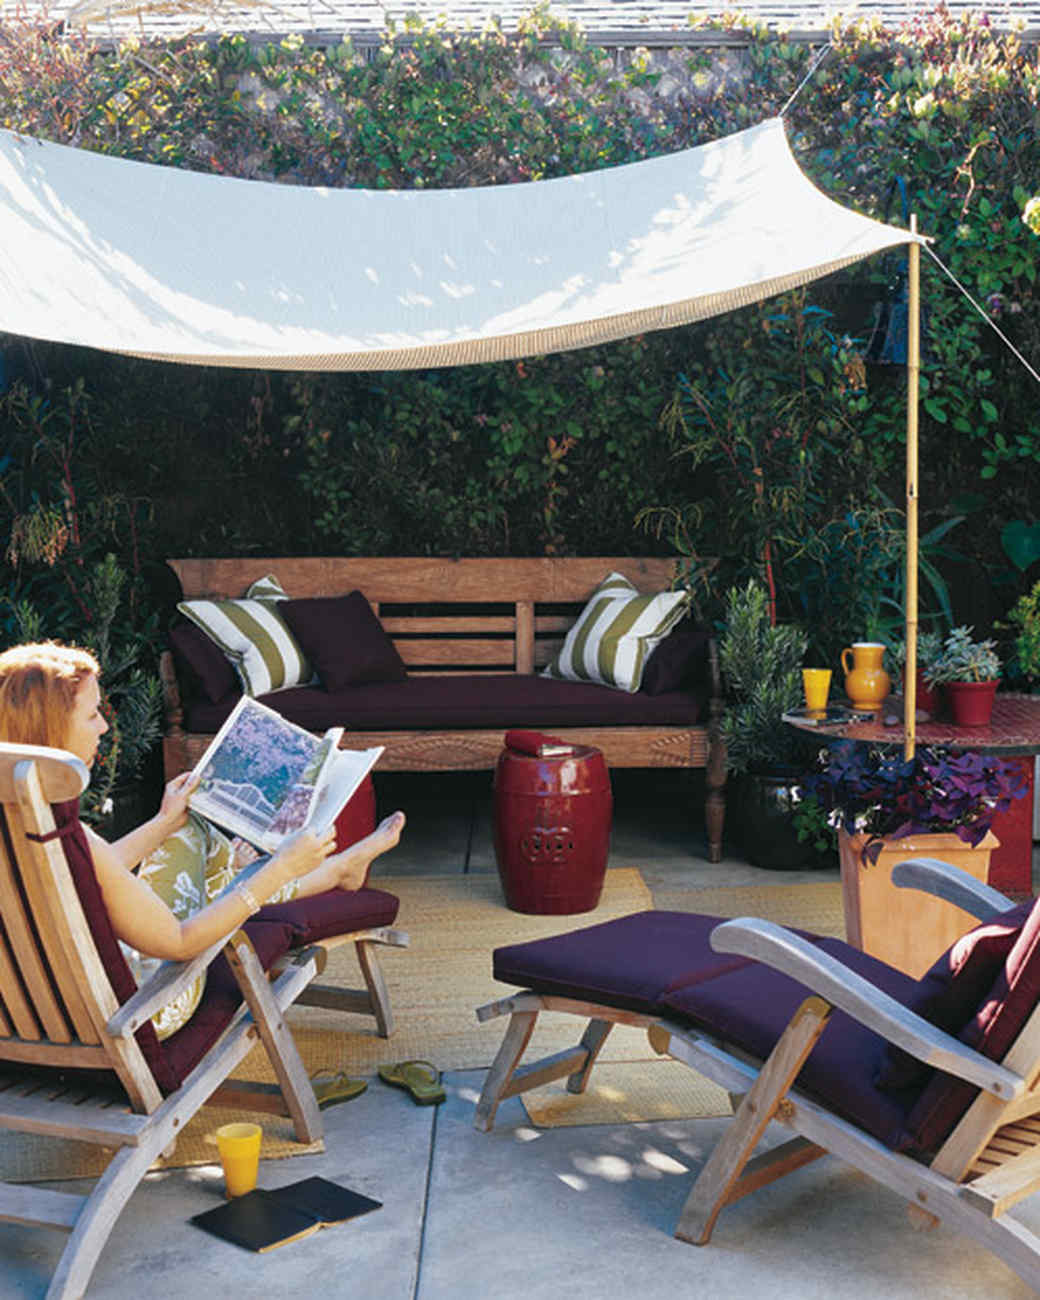 DIY Canopy Outdoor
 A Slice of Shade Creating Canopies